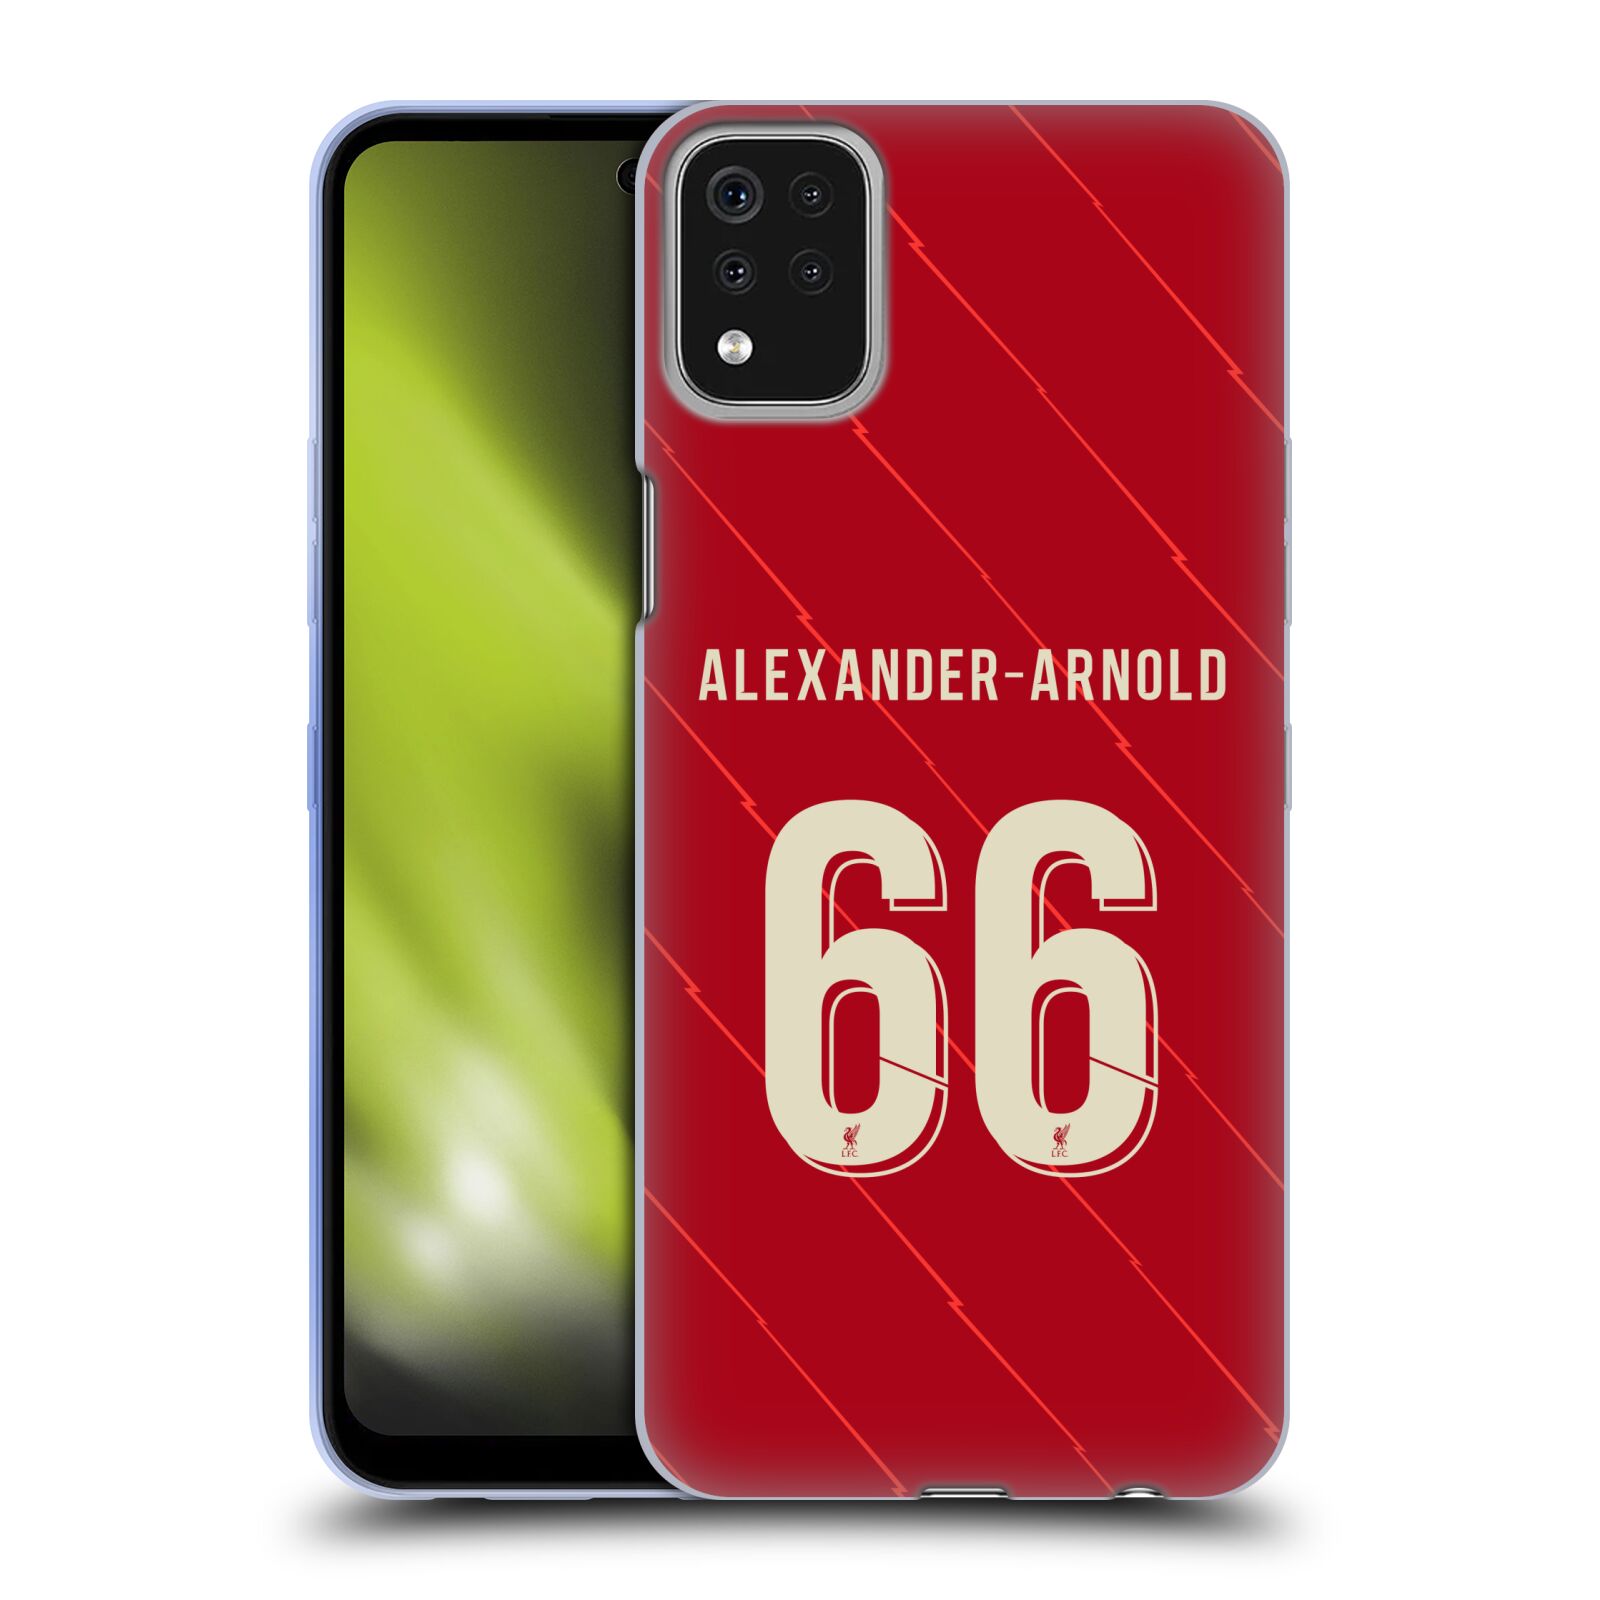 Official Liverpool Football Club Home 2018/19 Kit Hybrid Case Compatible for iPhone 7 Plus/iPhone 8 Plus 